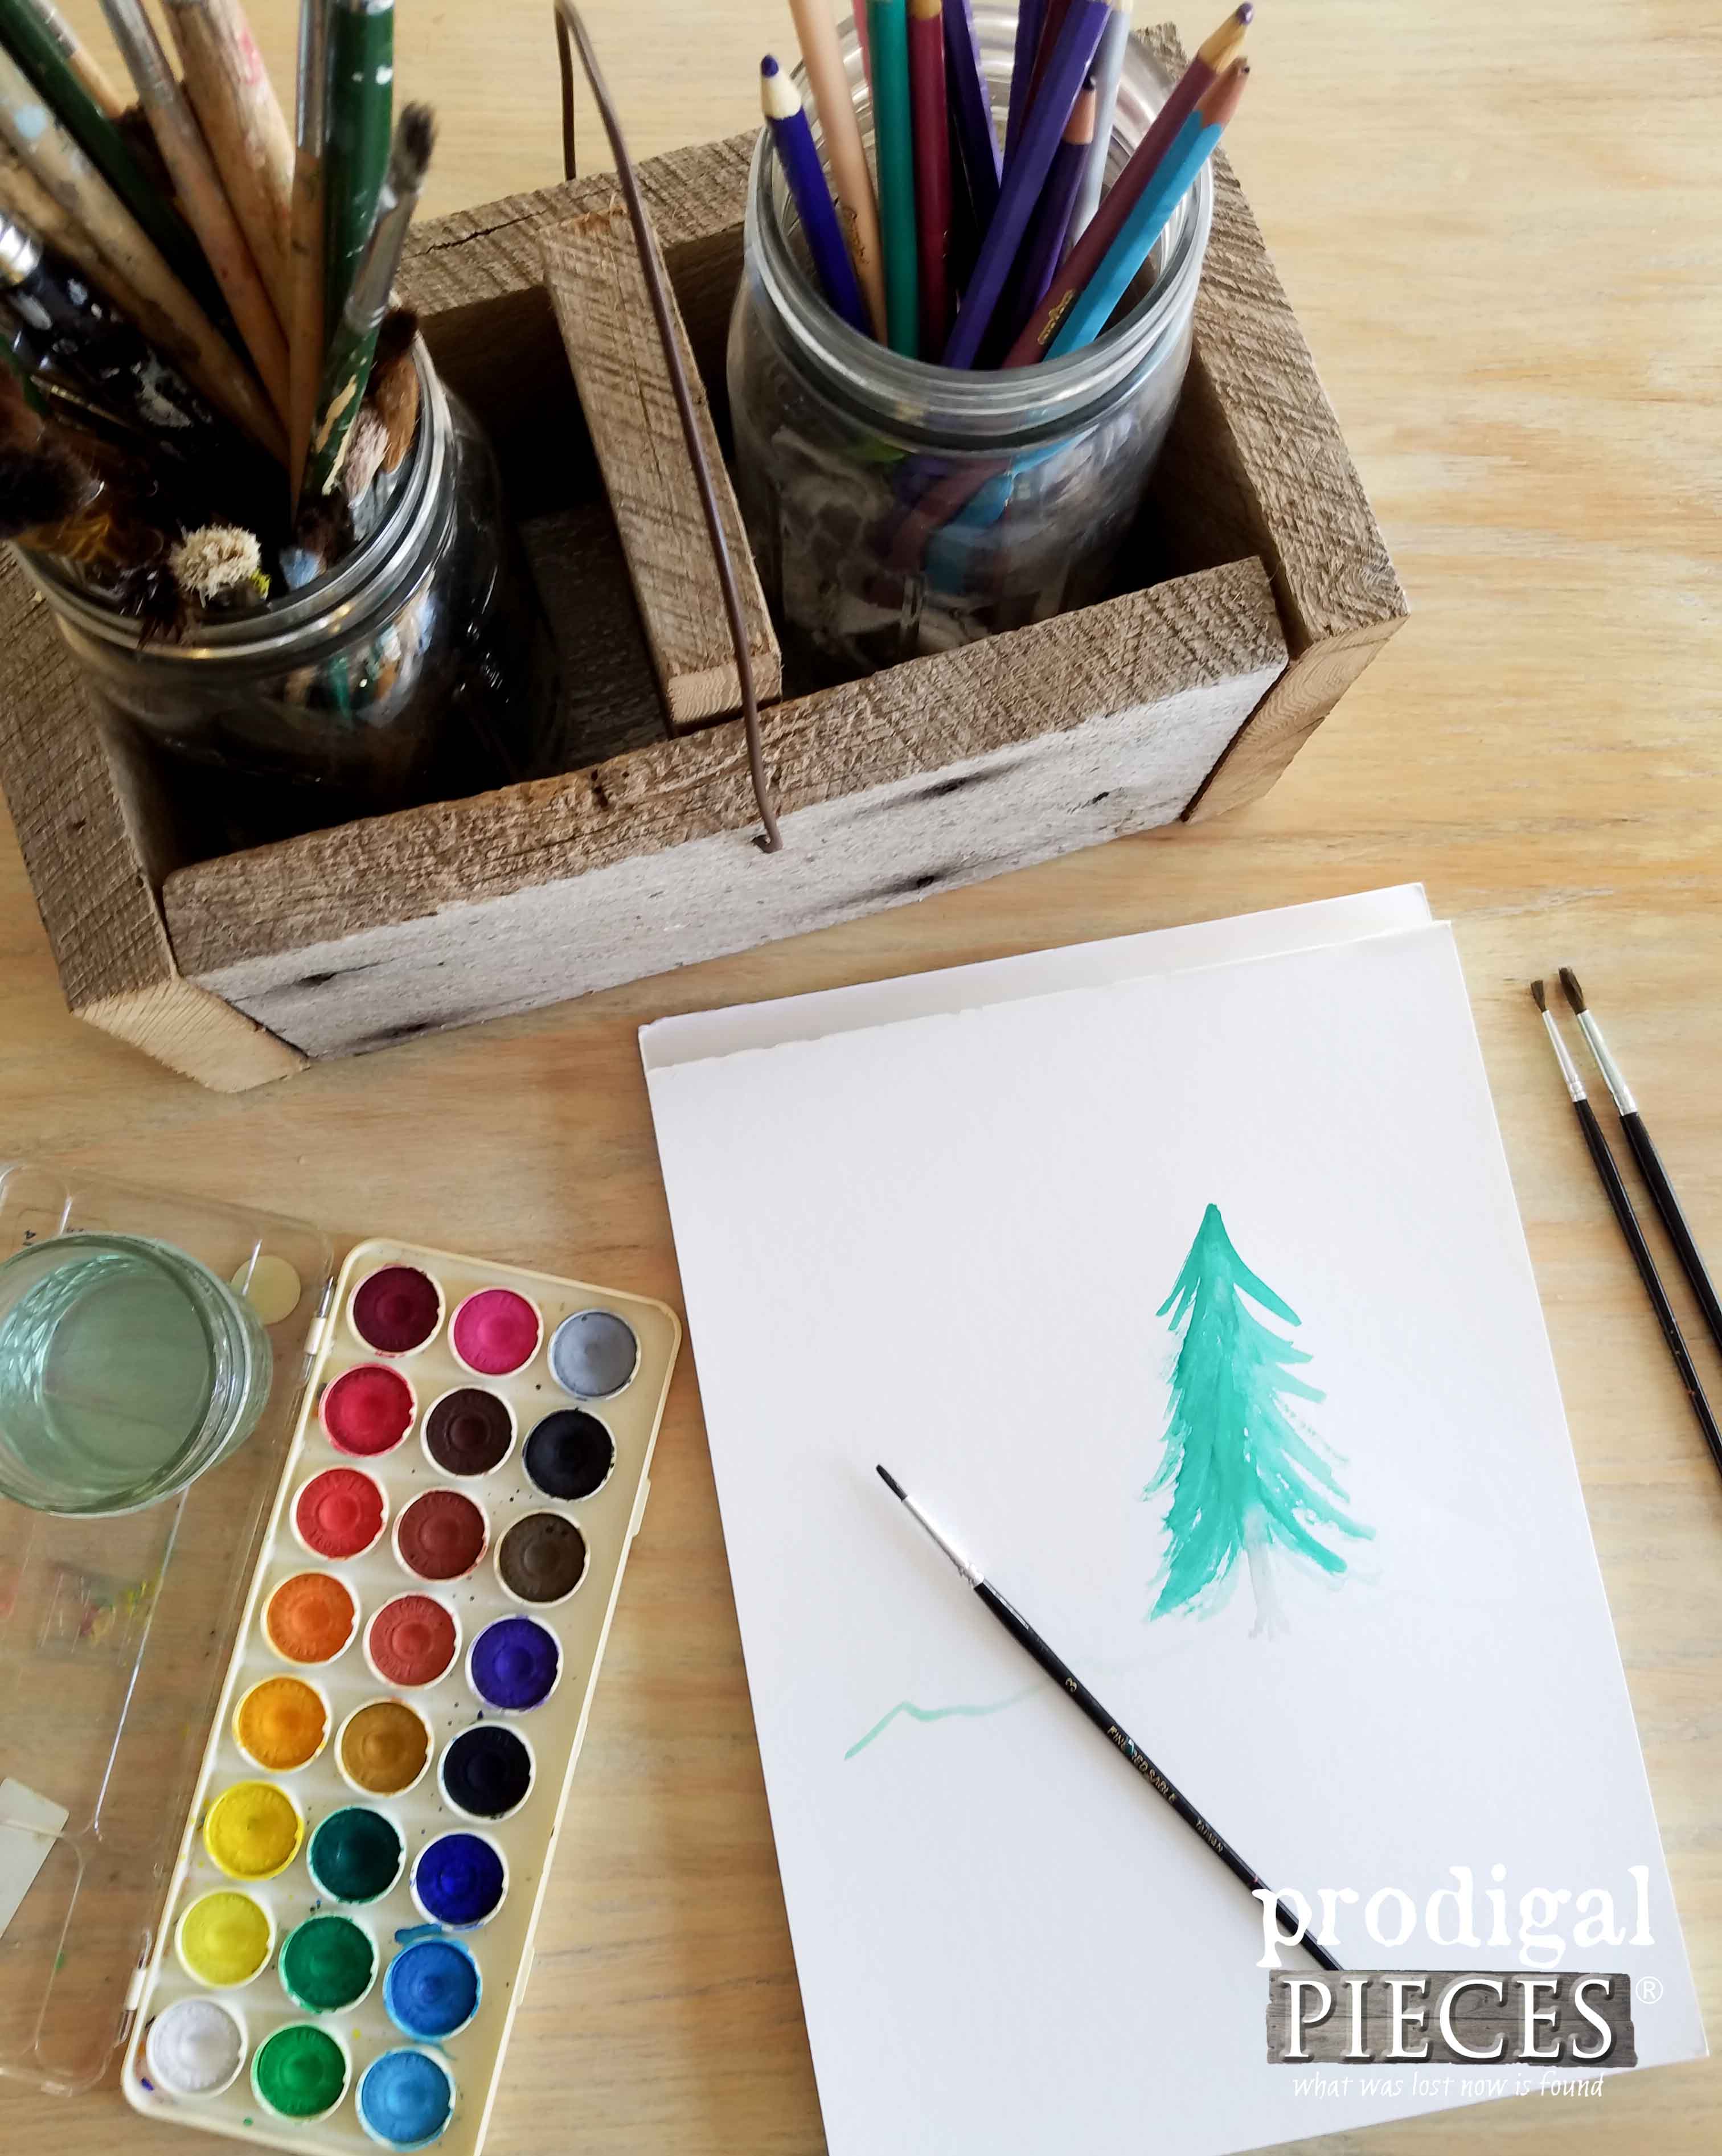 Build an Art Supply Caddy with this Tutorial by Prodigal Pieces | www.prodigalpieces.com